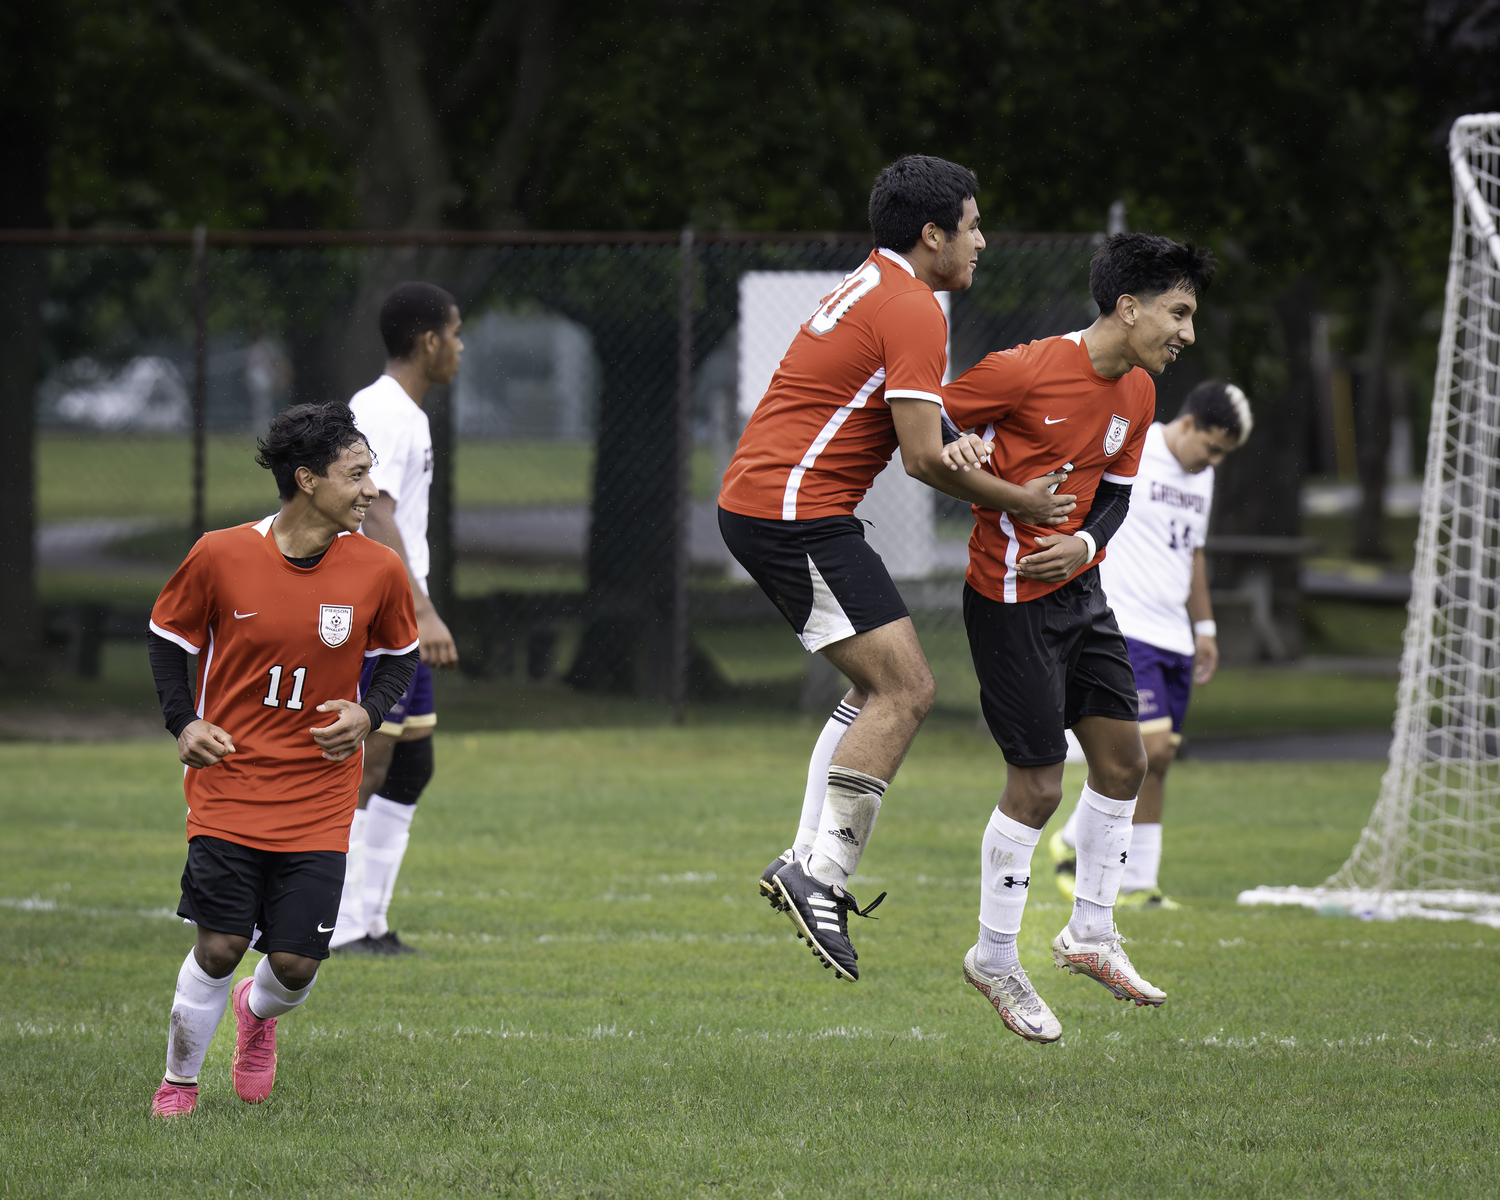 Helio Paucar celebrates with teammates after scoring a goal against Greenport. MARIANNE BARNETT